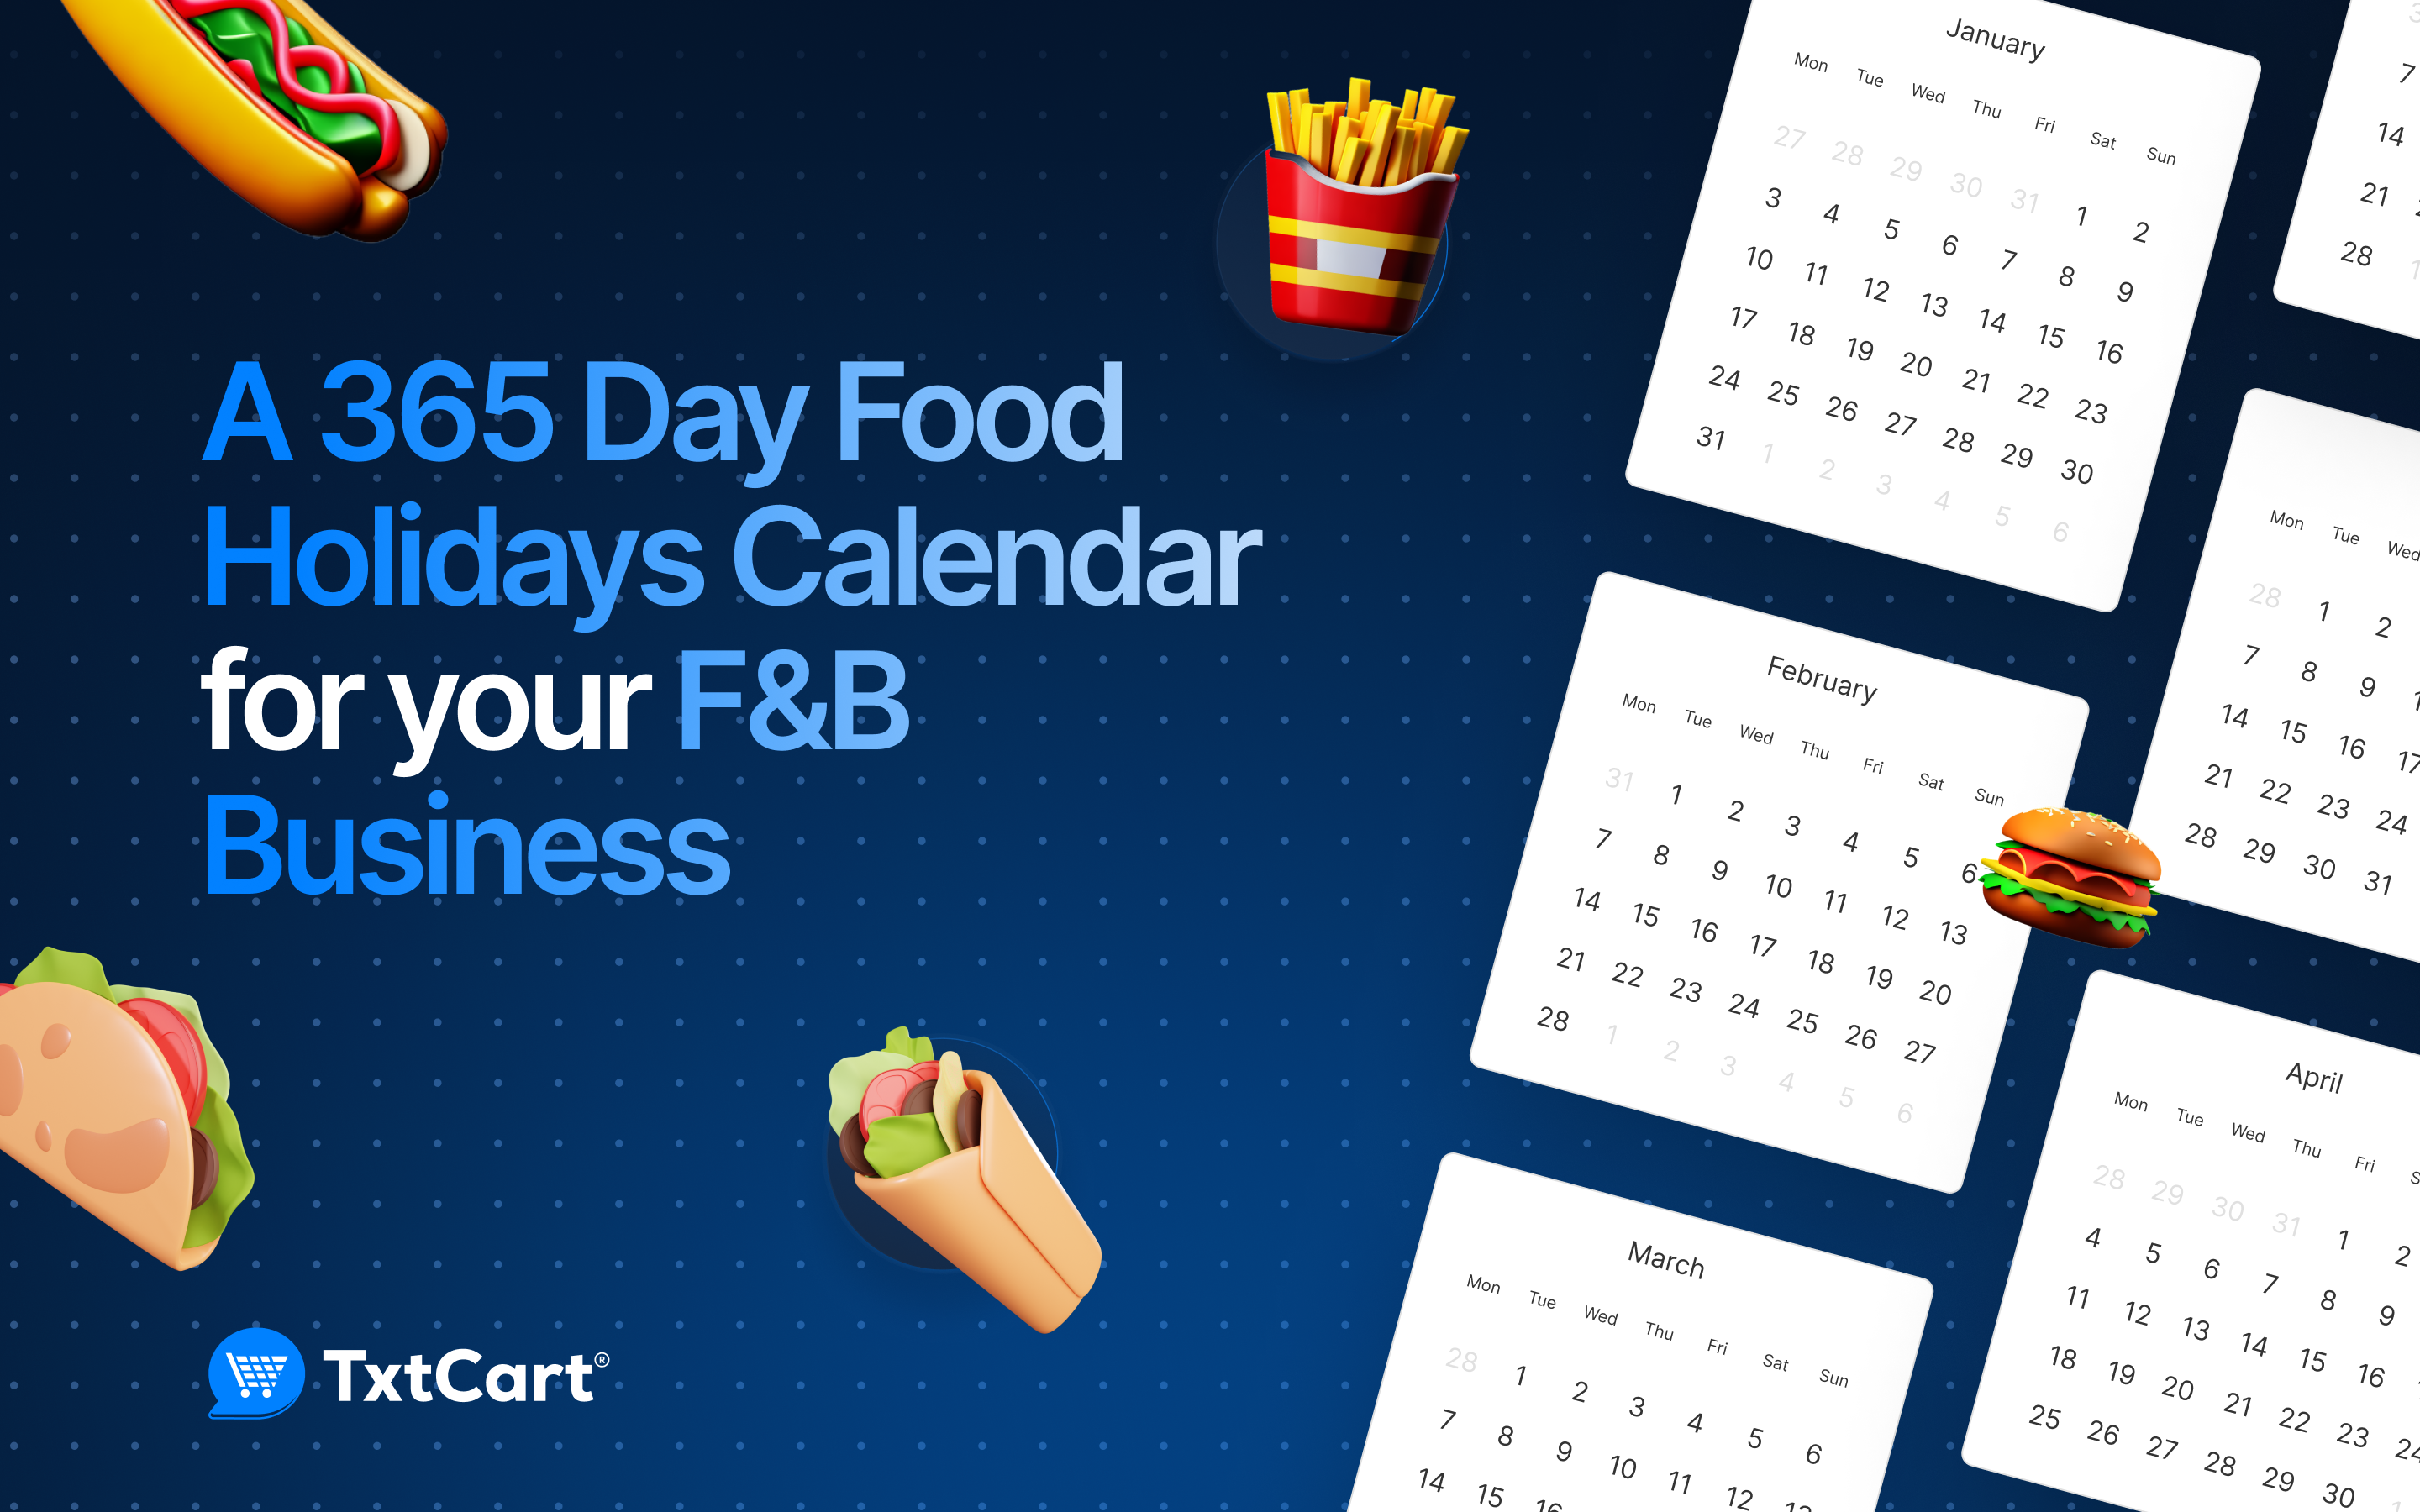 A 365 Day Food Holidays Calendar for your F&B Business